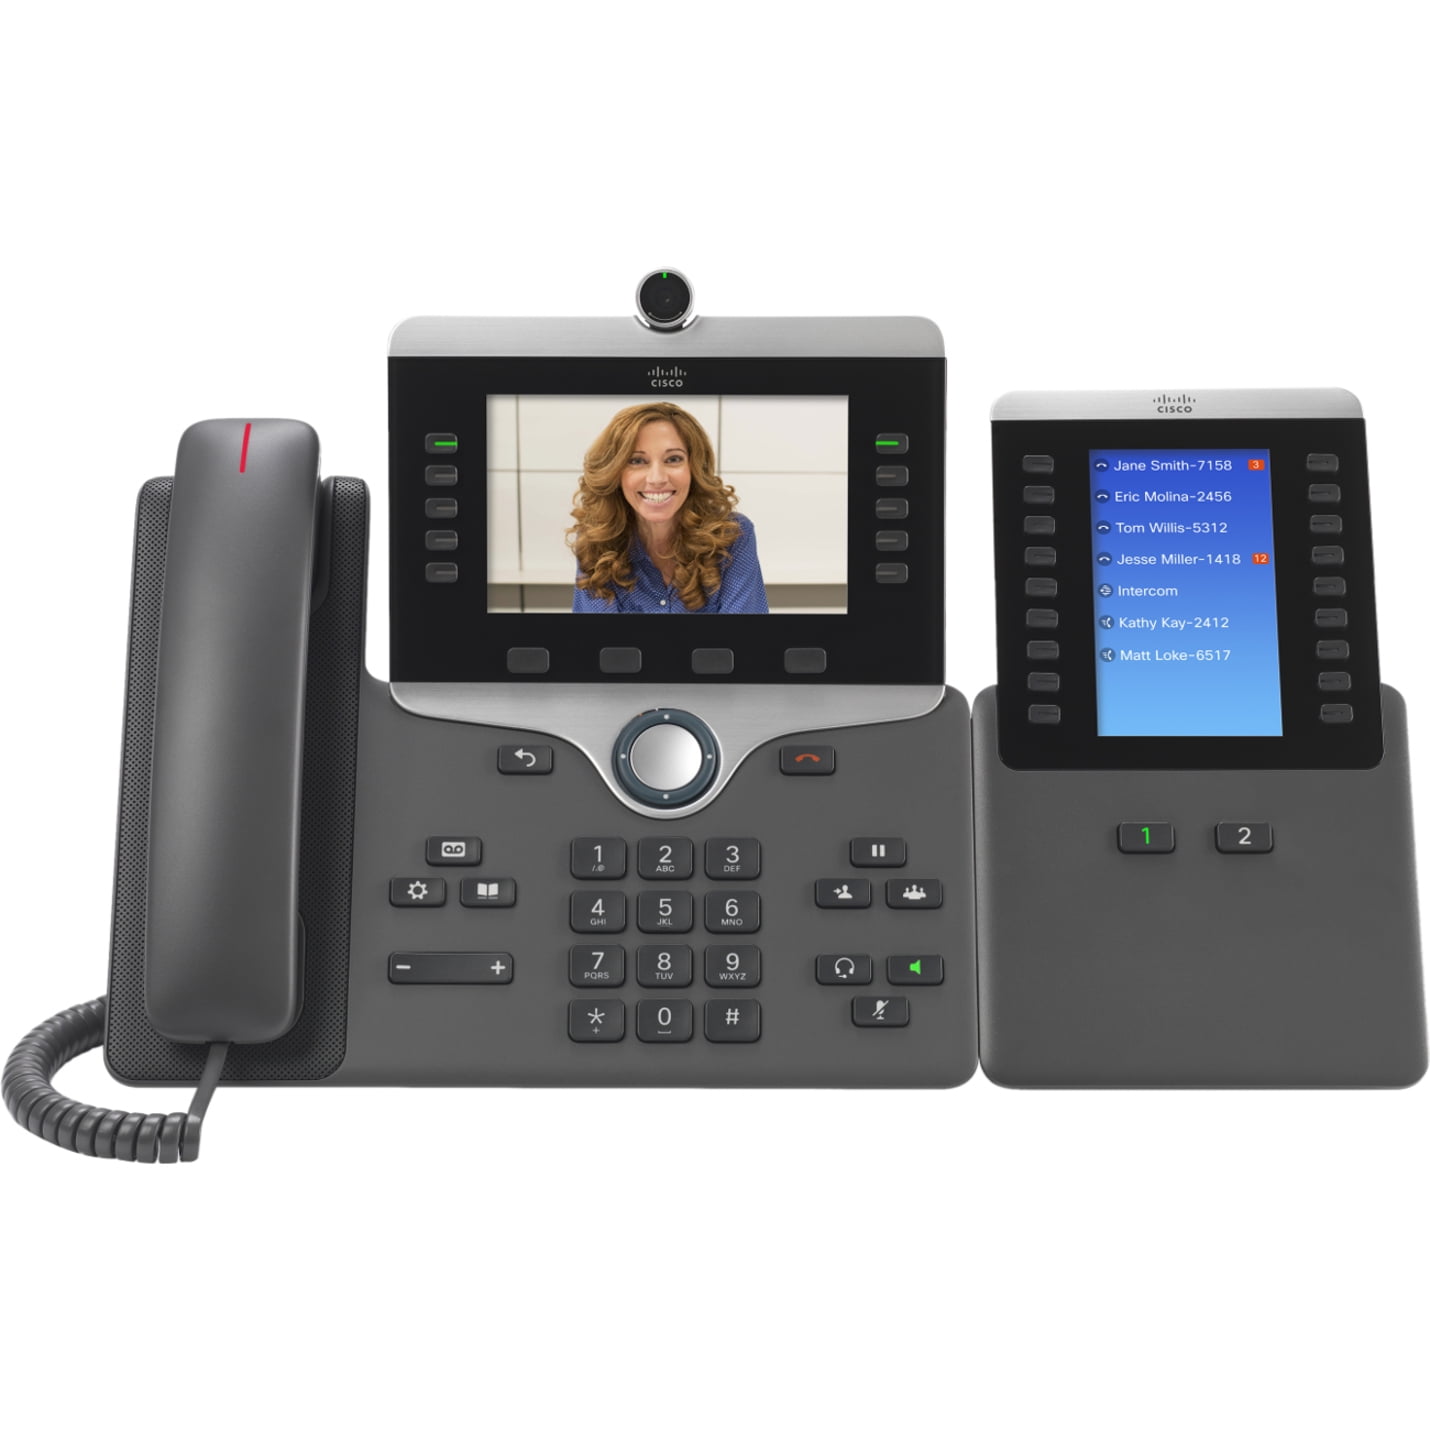 Cisco 8865 IP Phone, Corded/Cordless, Corded/Cordless, Wi-Fi